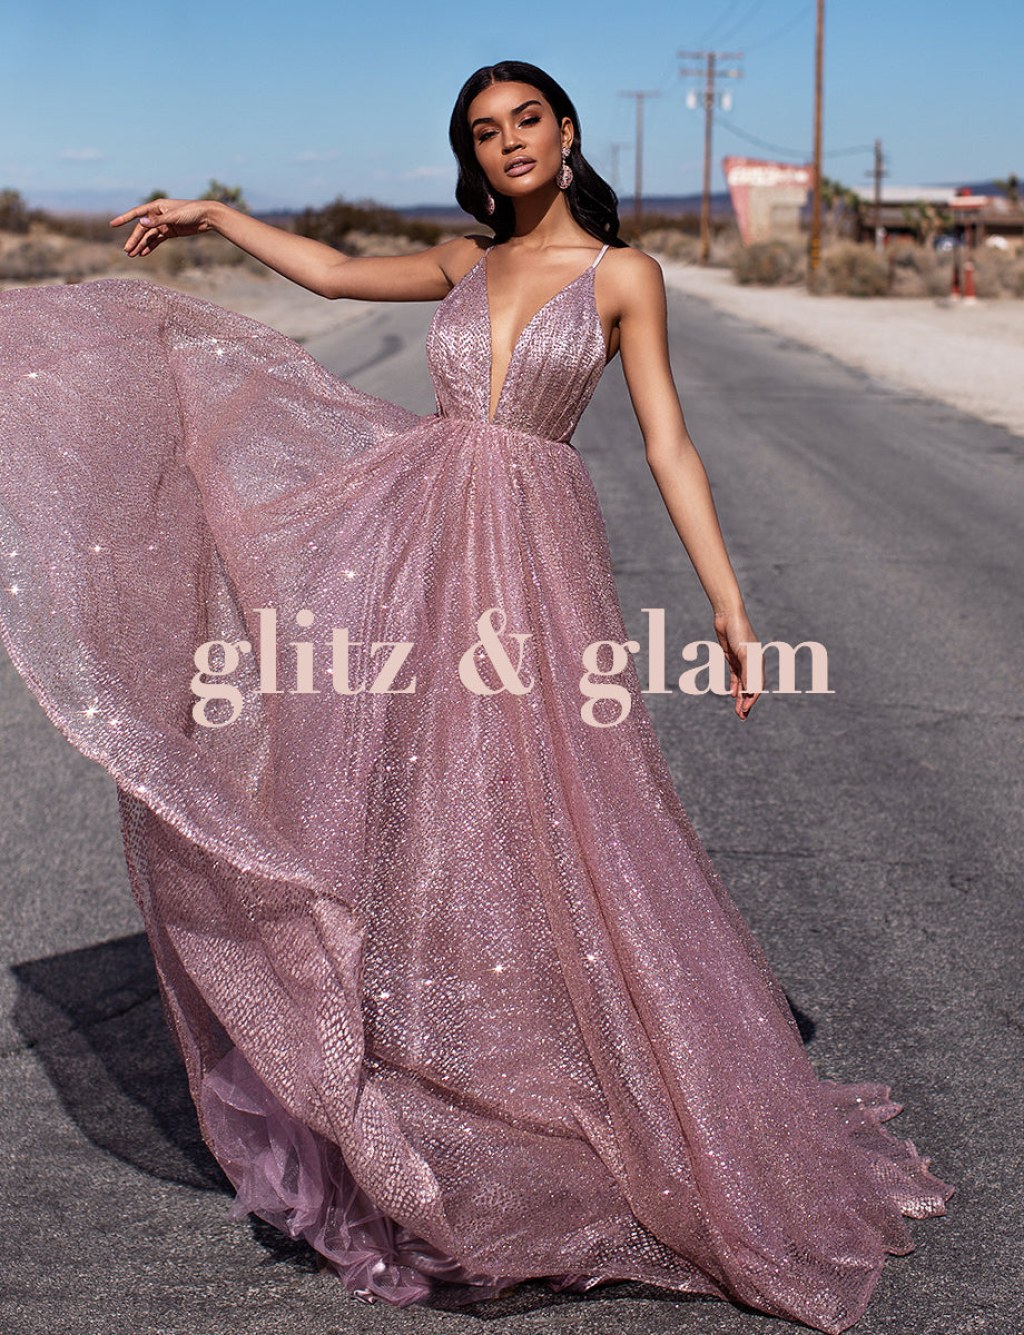 Picture of: Glitz & Glam Dresses  Afterpay  Zip  Sezzle – A&N Luxe Label